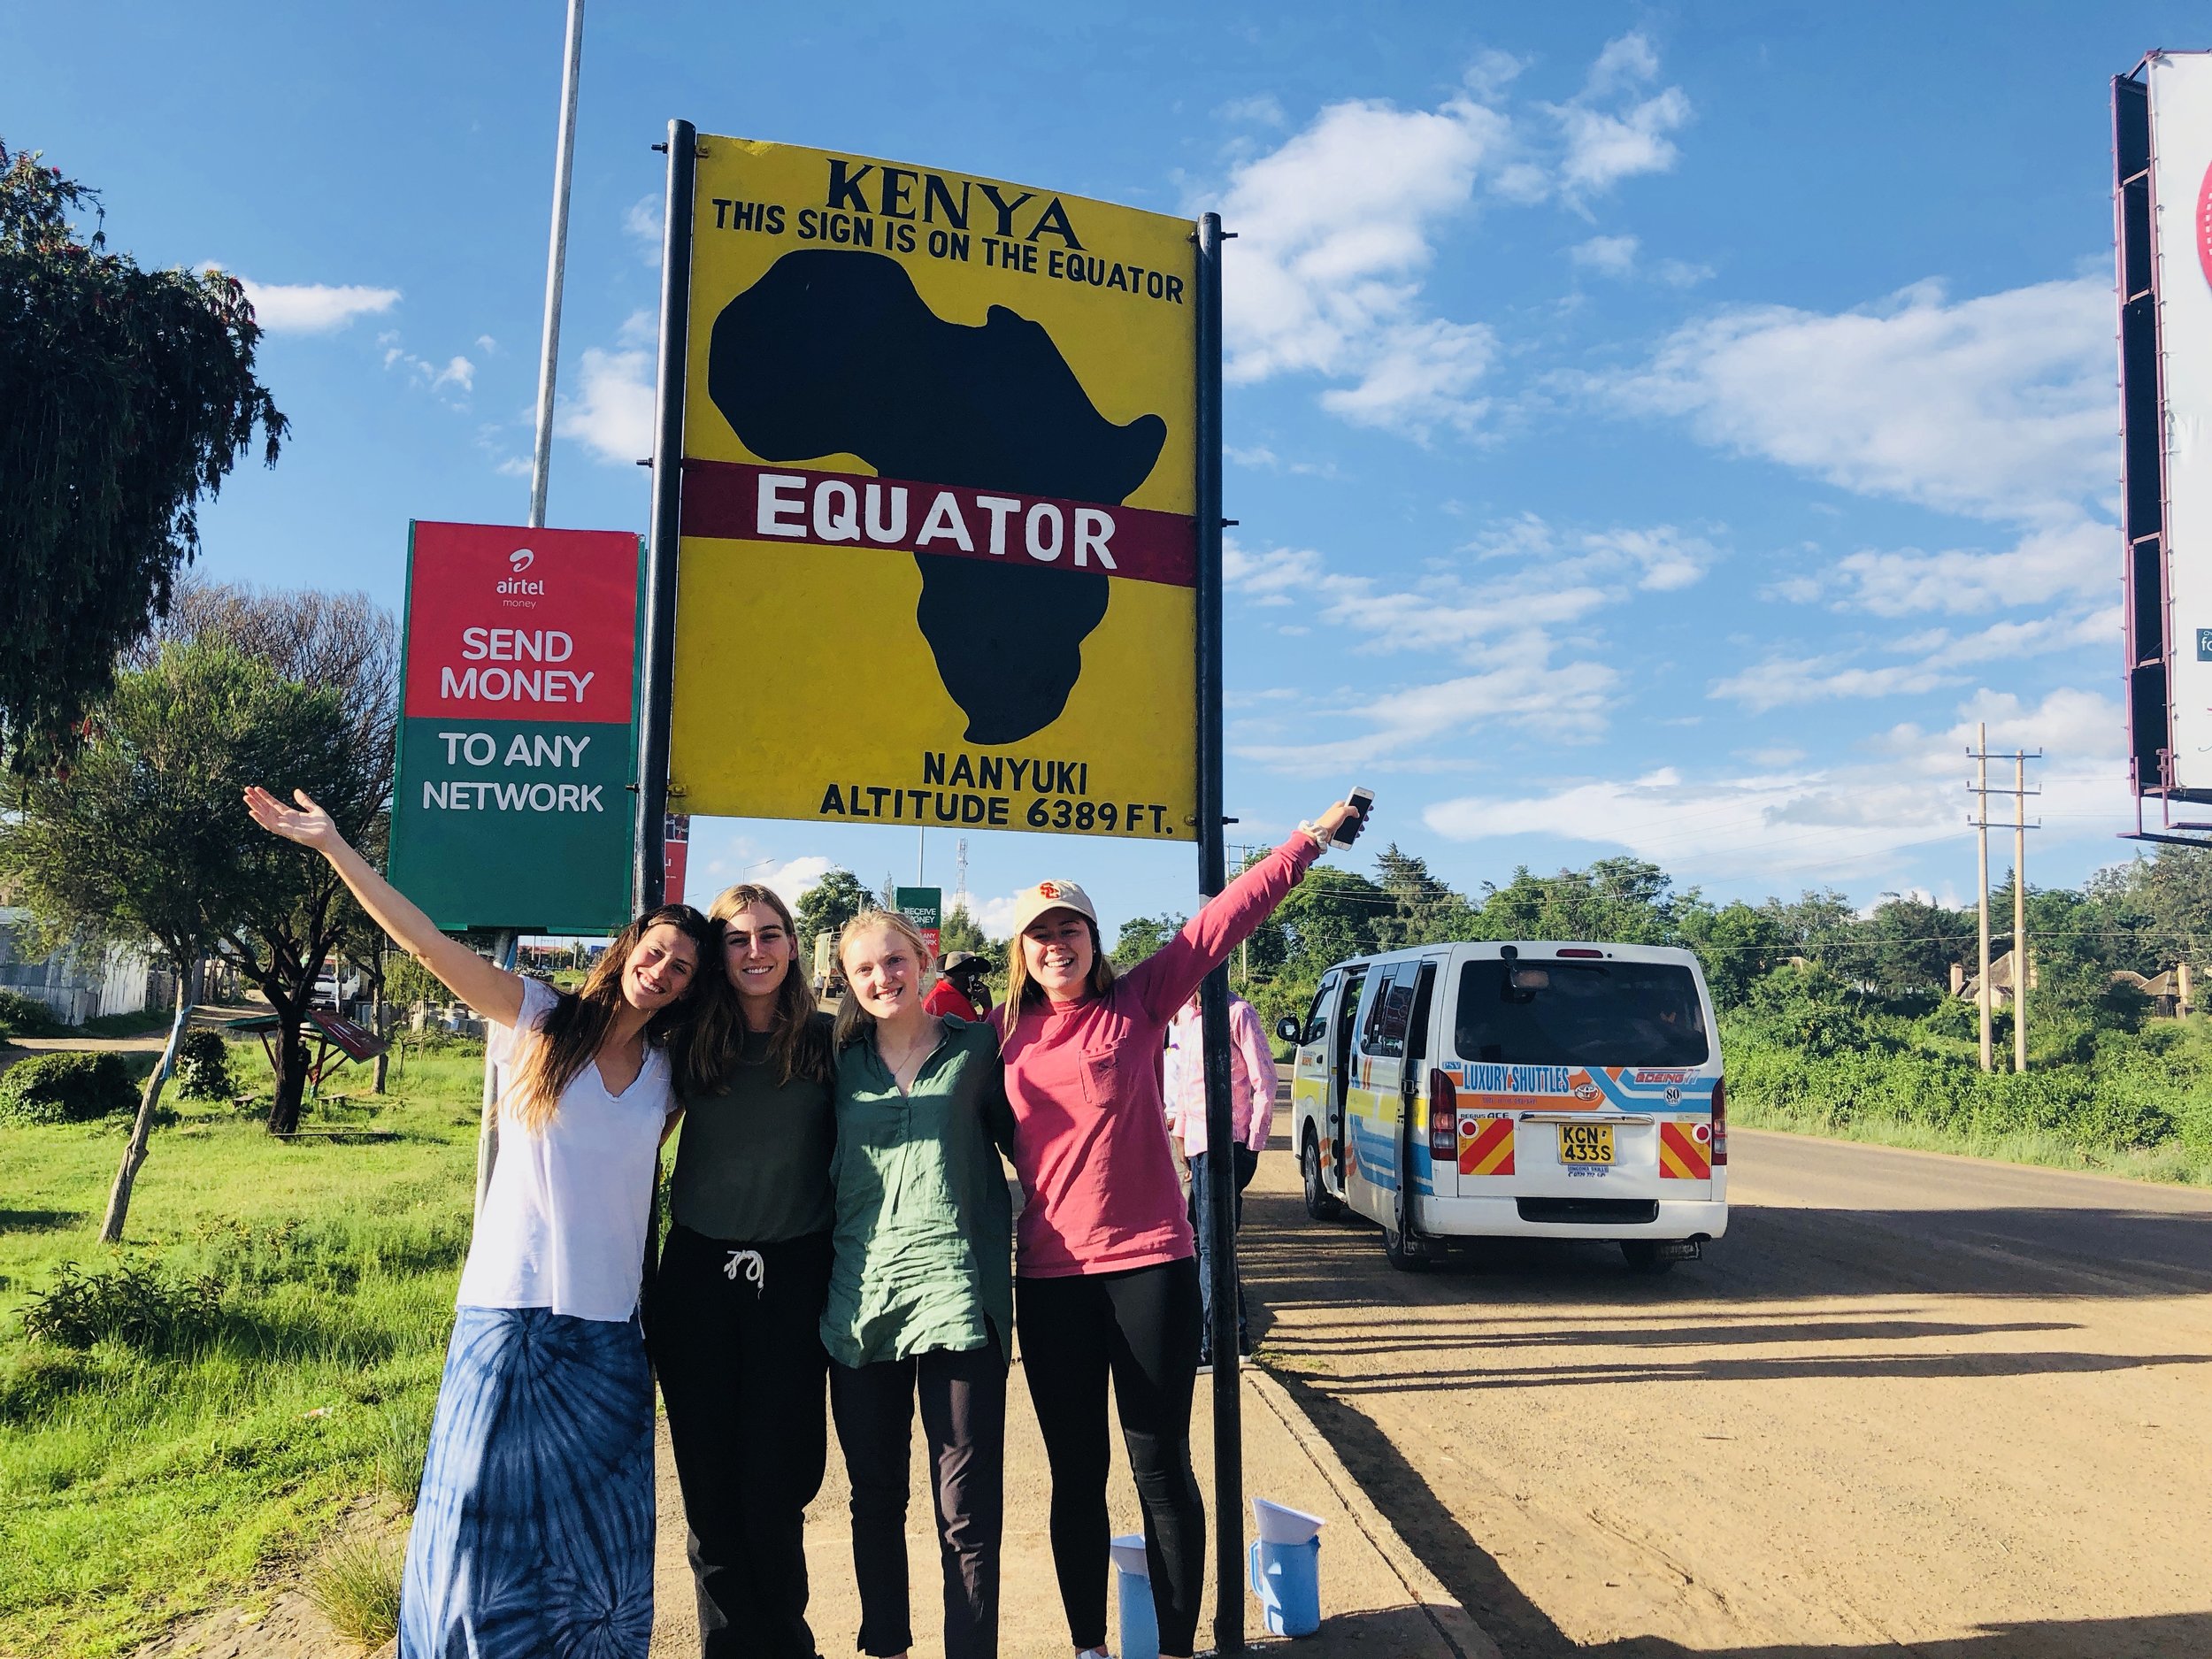 Students on the May 2018 Kenya project assessment trip cross the equator.